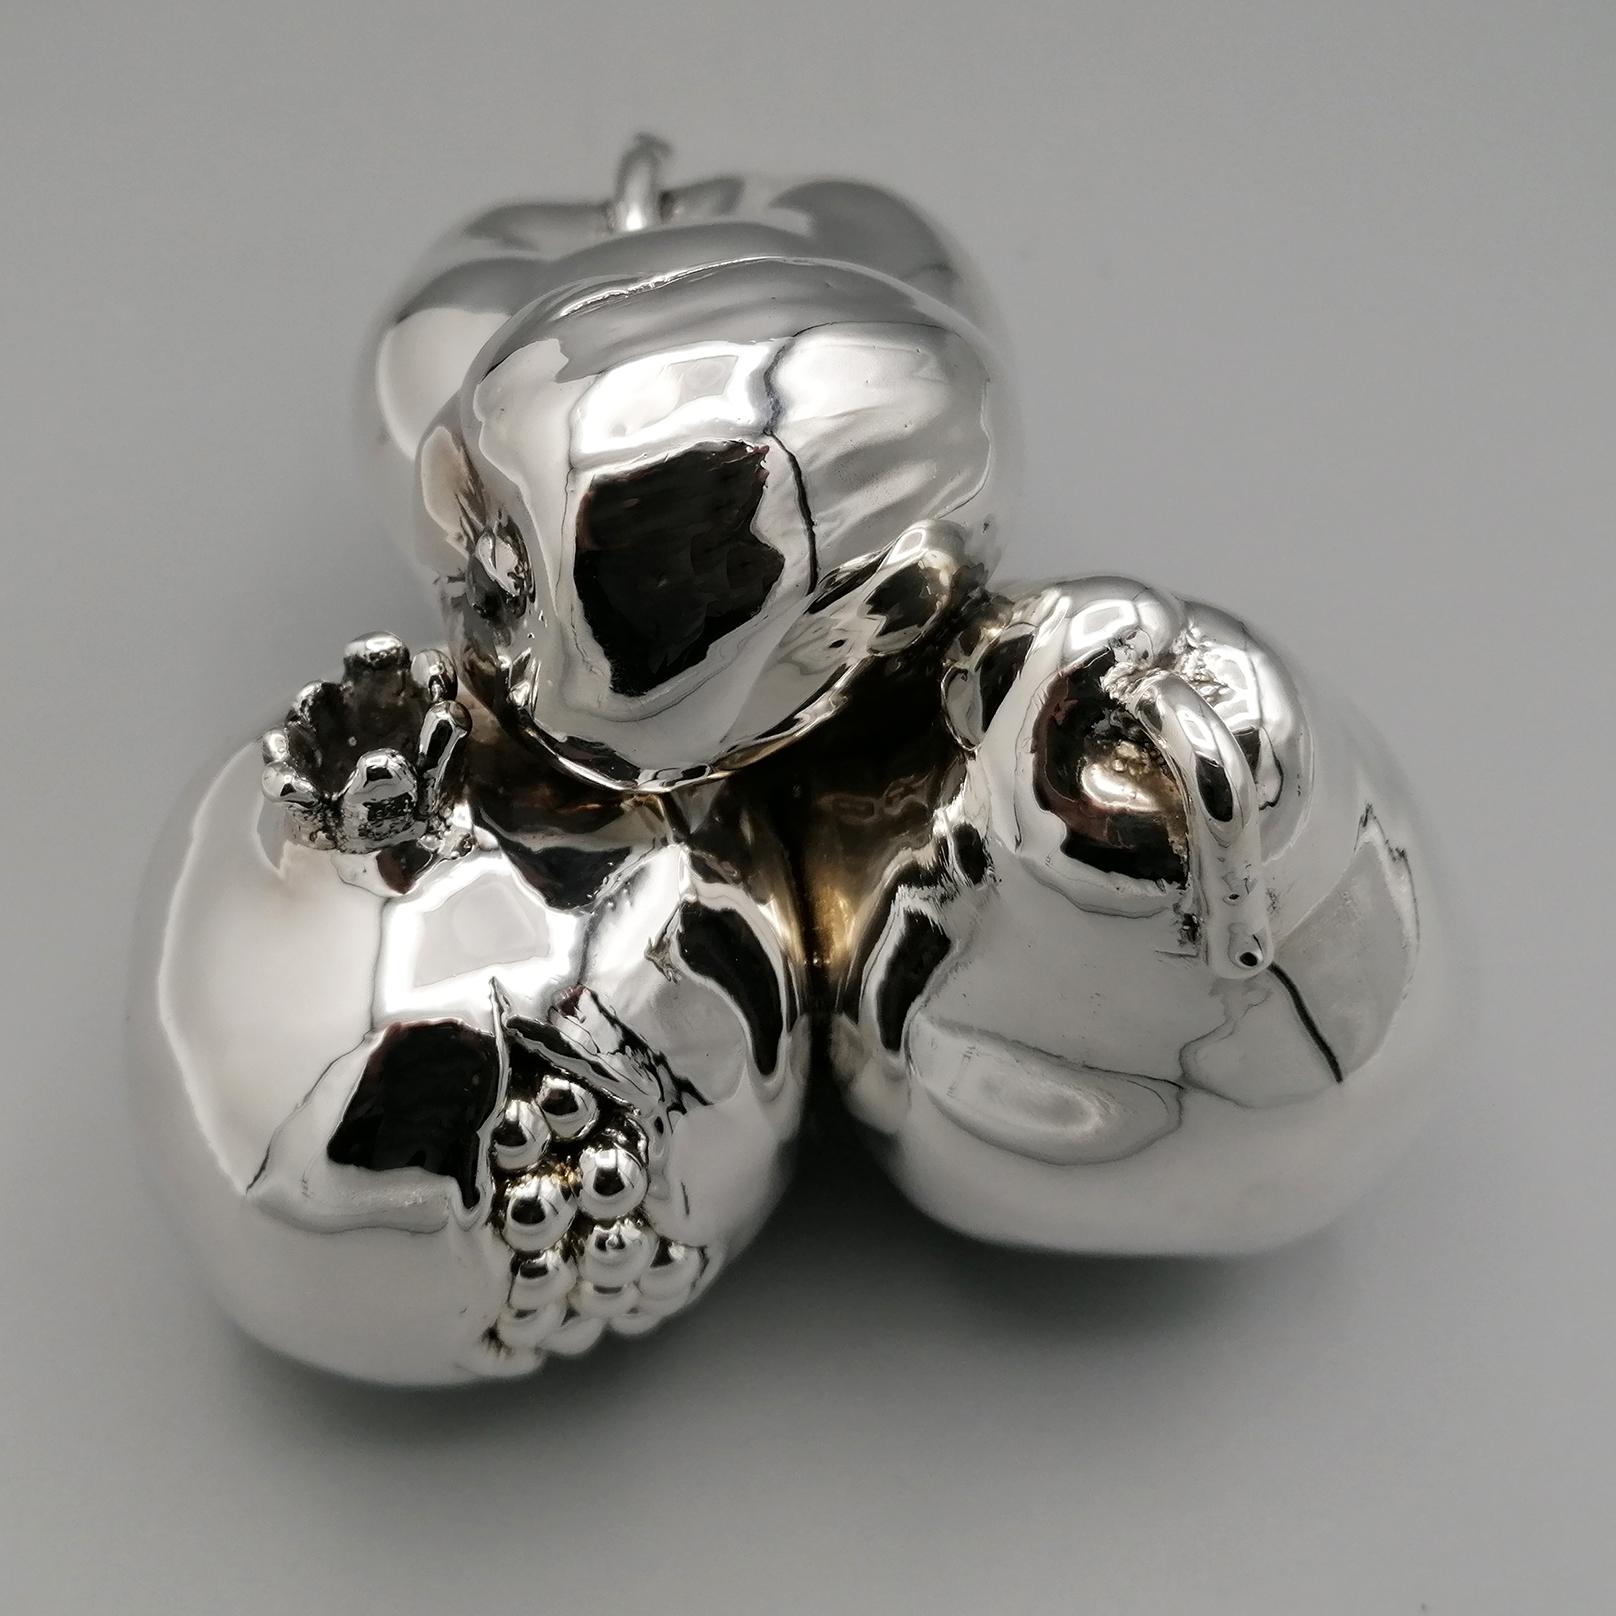 20th Century Fruit set - pomegranate pear fig apple - in 999 silver